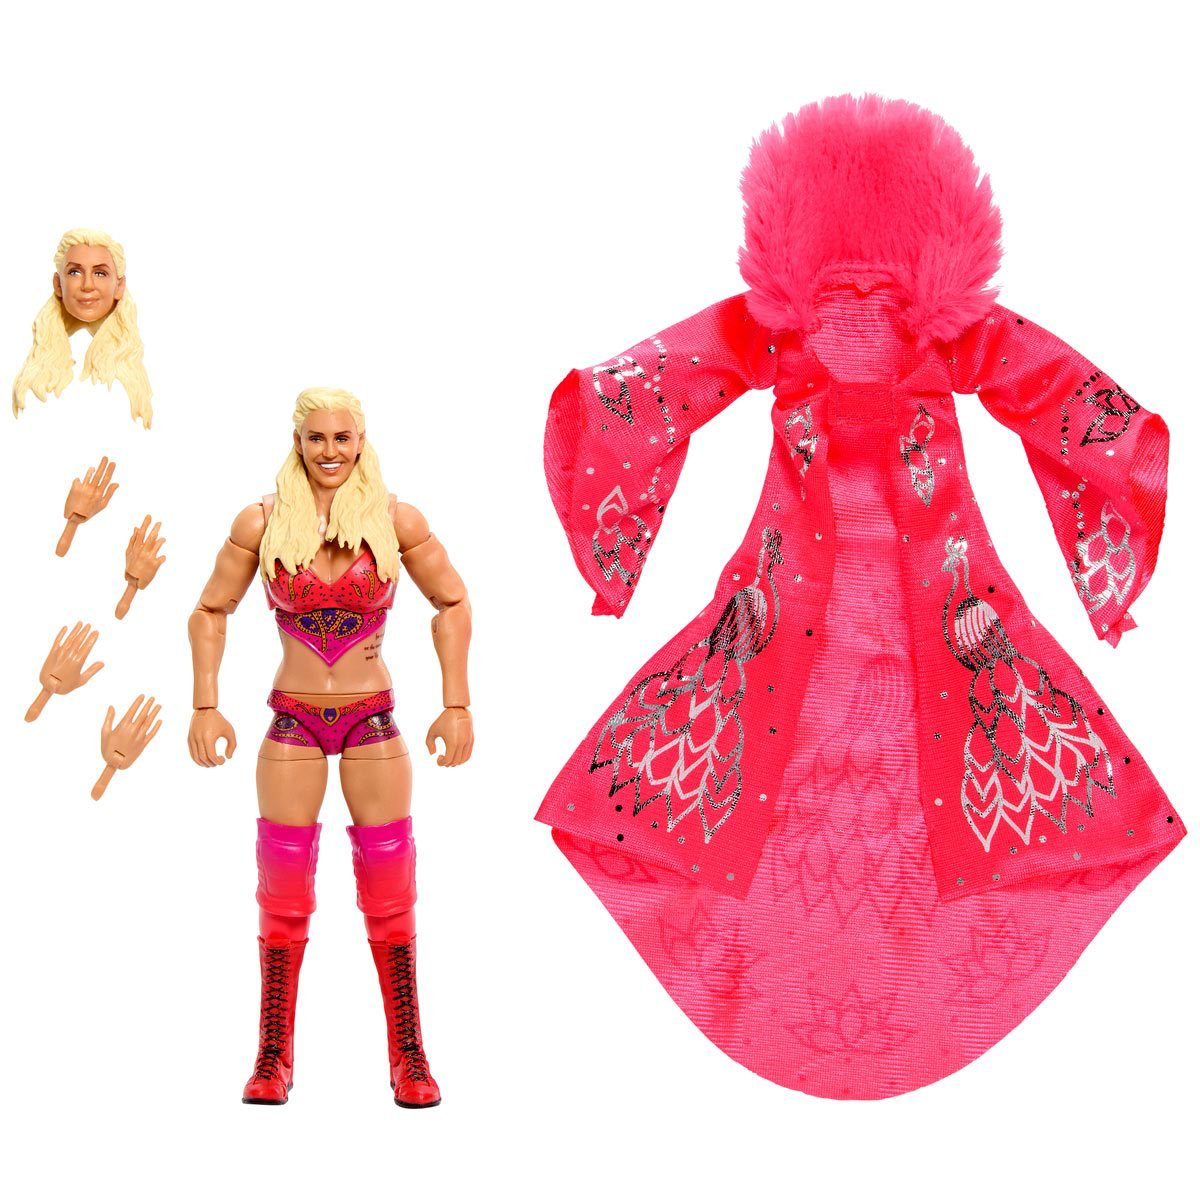 Charlotte Flair - WWE Mattel Ultimate Edition Greatest Hits Action Figure